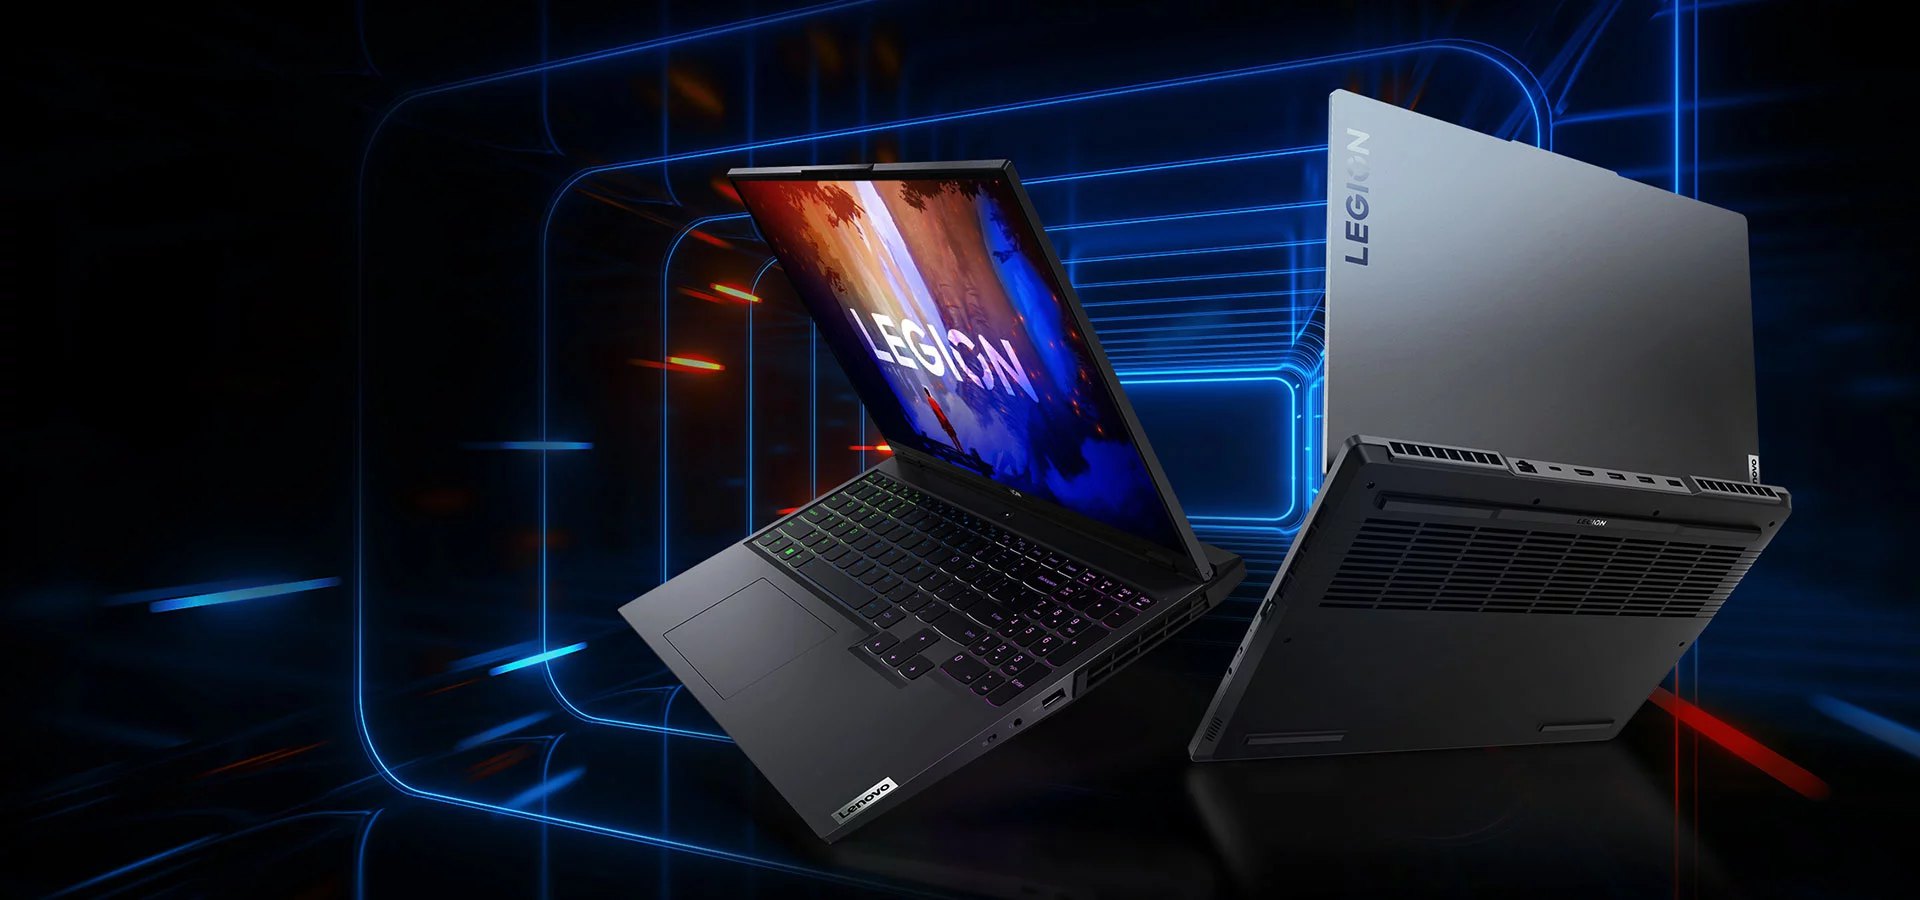 Four Lenovo Legion gaming laptops facing different directions, with cover open at varying degrees: Lenovo Legion 5, Lenovo Legion 5 Pro, Lenovo Legion 7, and Lenovo Legion Slim 7.